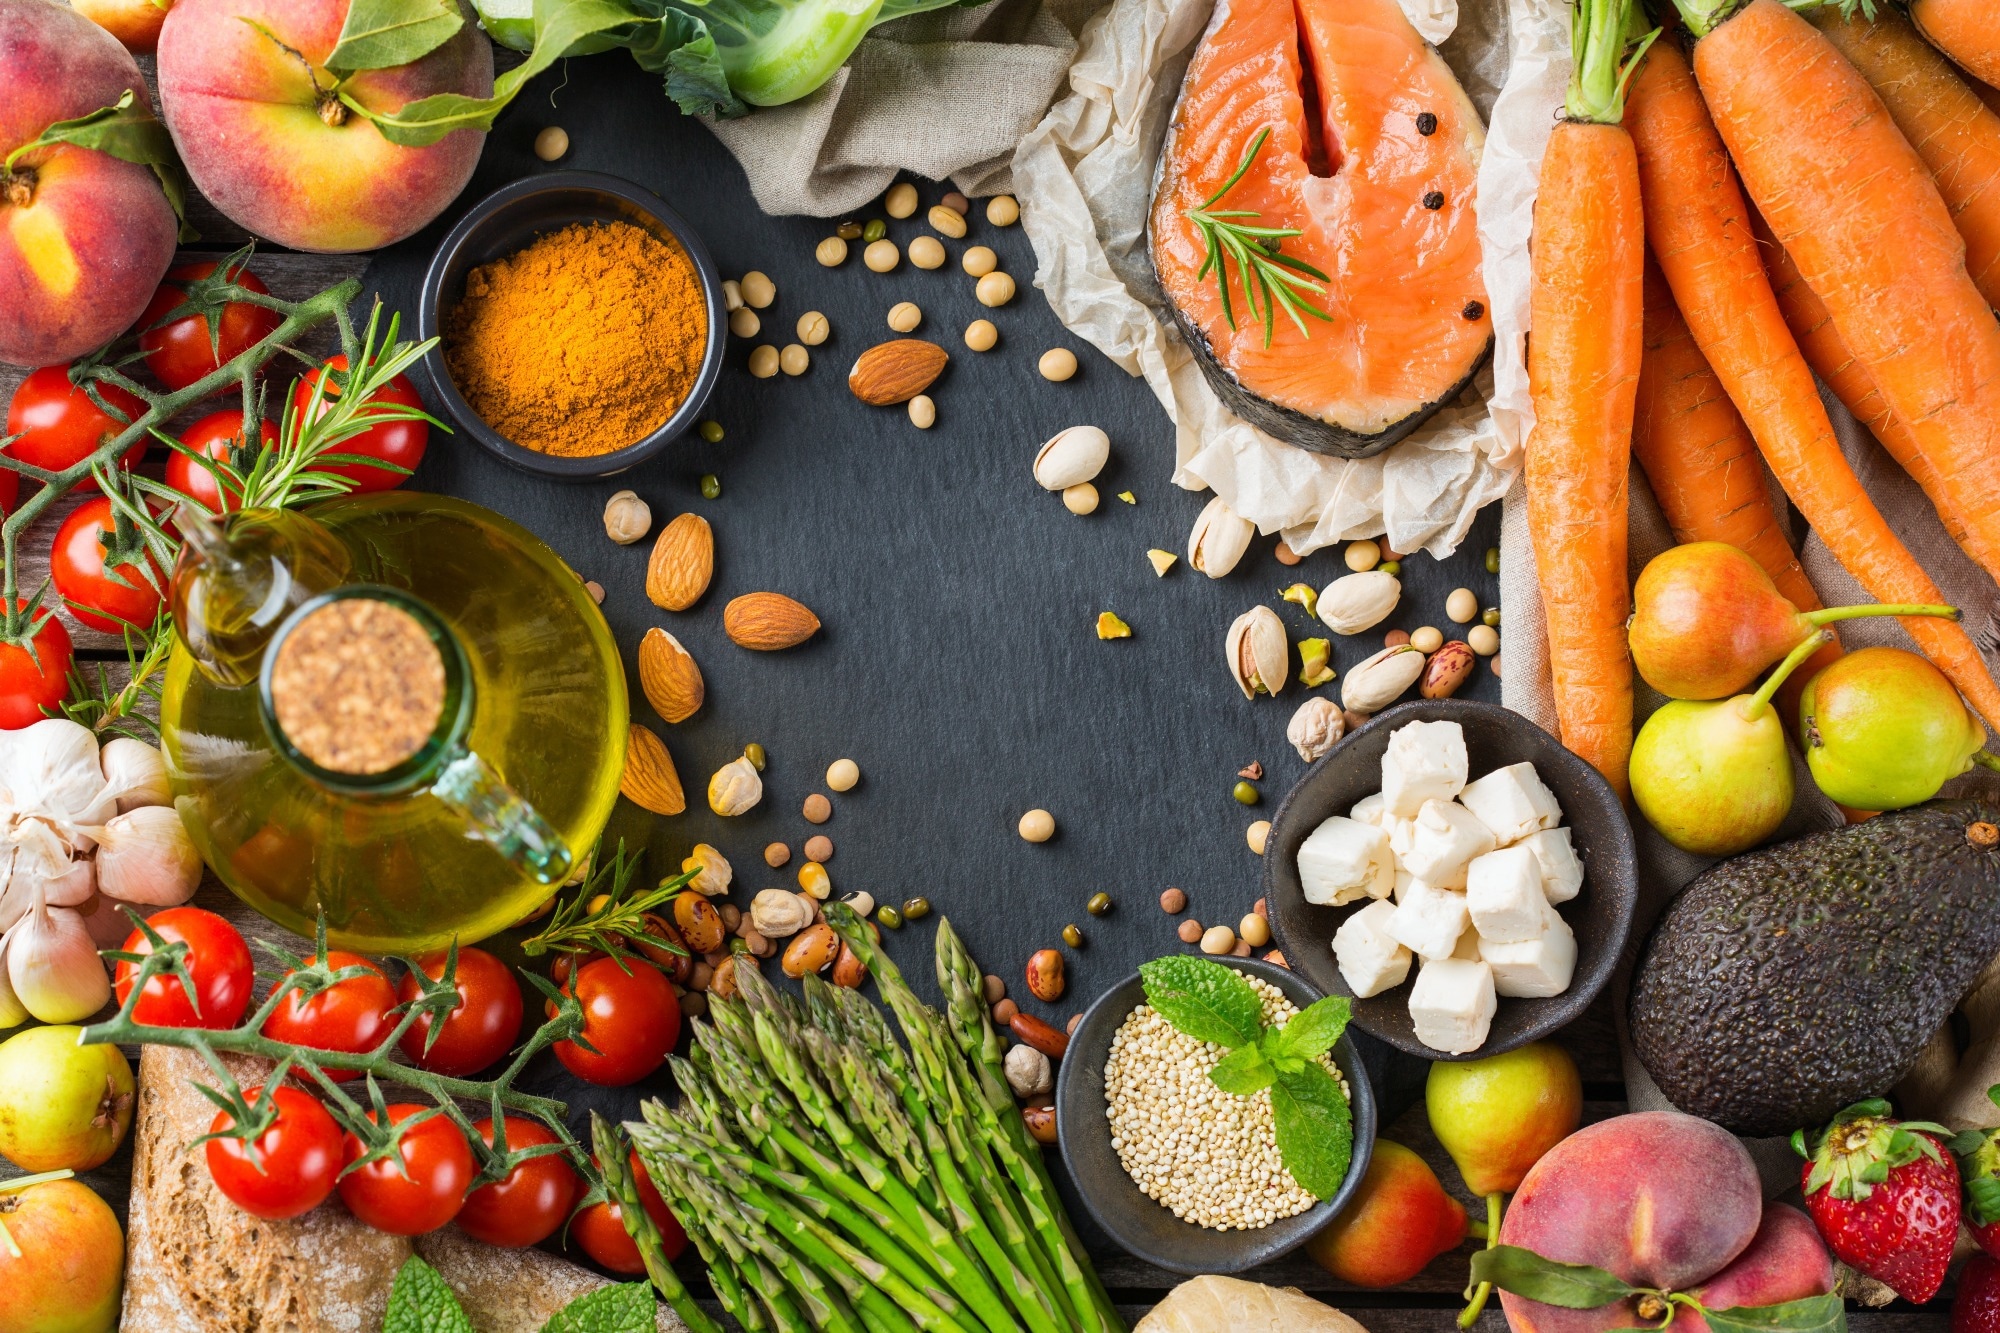 Study: Effects of Animal and Vegetable Proteins on Gut Microbiota in Subjects with Overweight or Obesity. Image Credit: AntoninaVlasova/Shutterstock.com